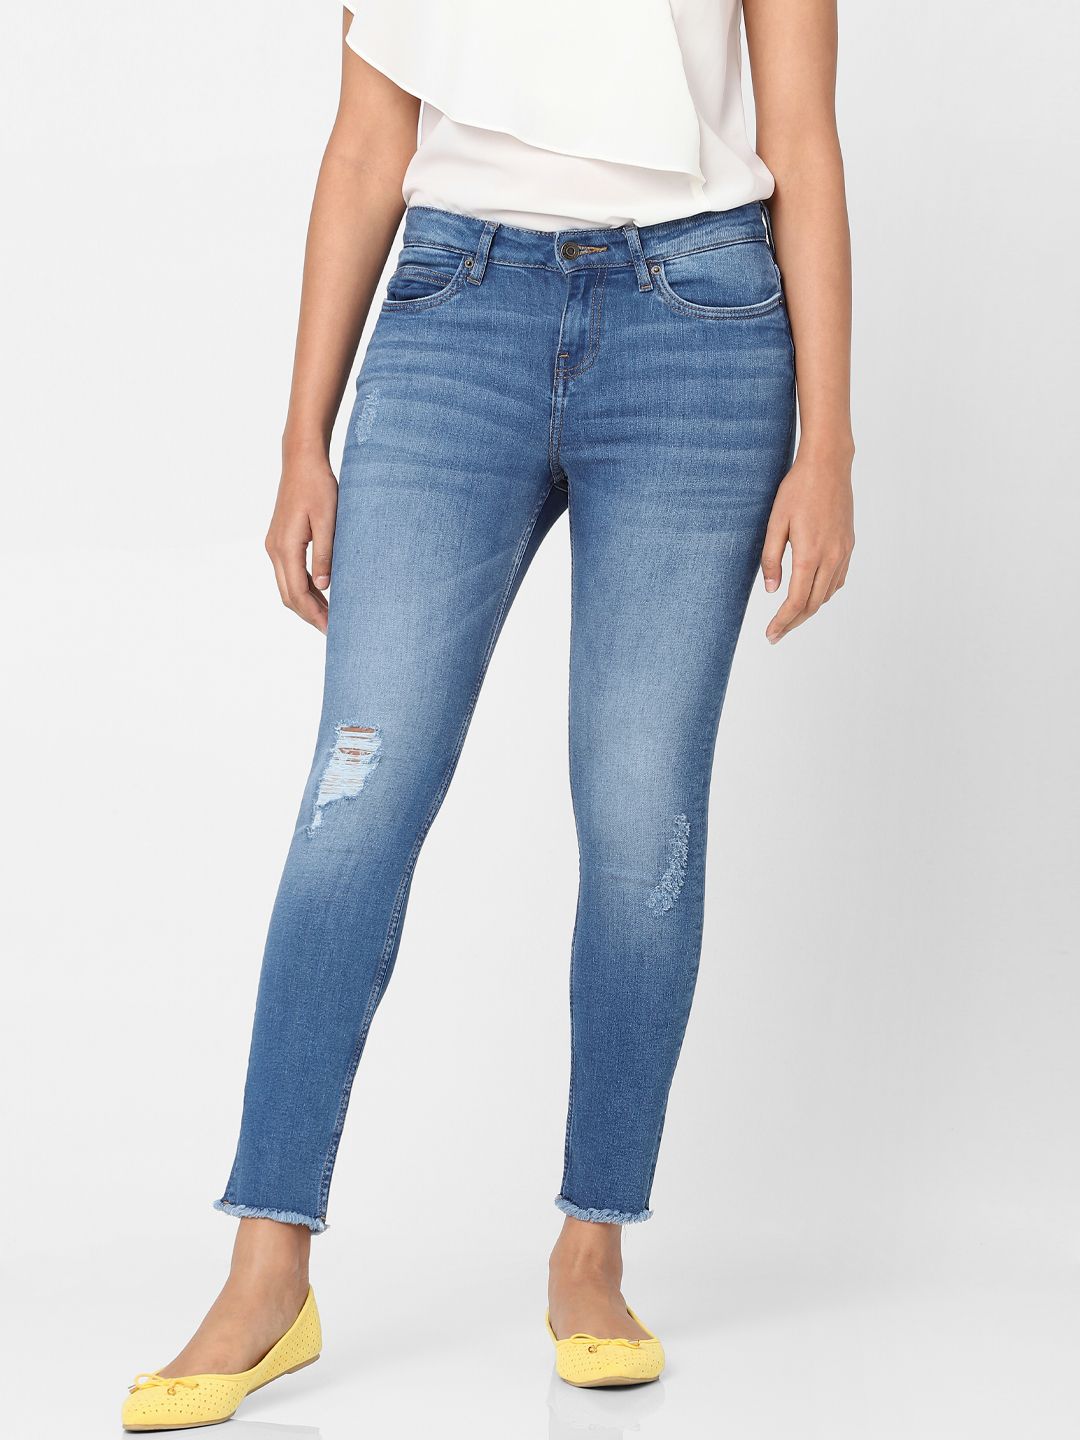 Vero Moda Women Blue Skinny Fit Mildly Distressed Mid-Rise Light Fade Stretchable Jeans Price in India